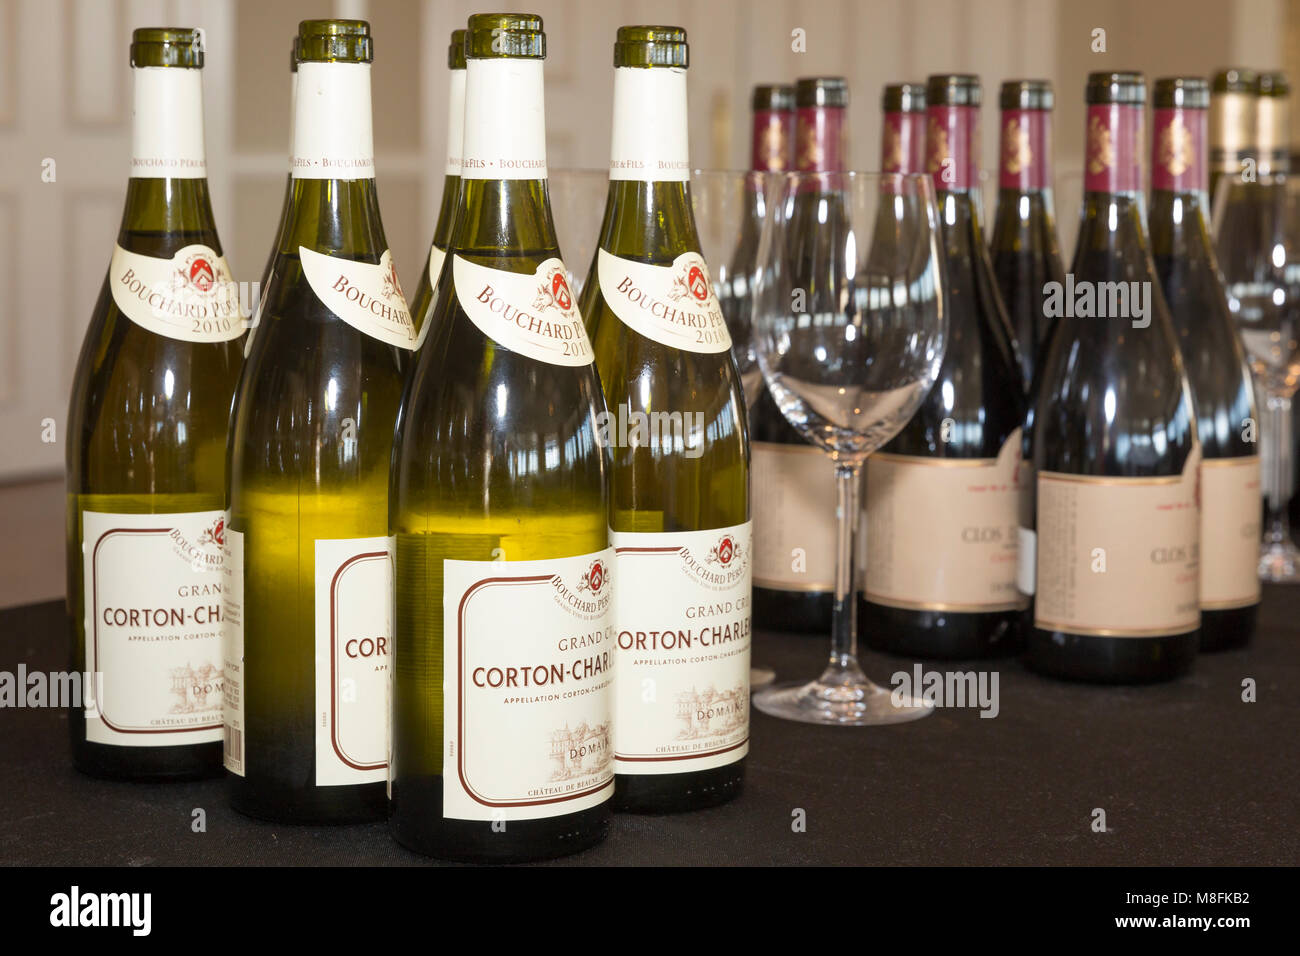 French wine bottles ready for Confrerie des Chevaliers du Tastevin - wine club event at Bay Colony, Naples, Florida, USA Stock Photo